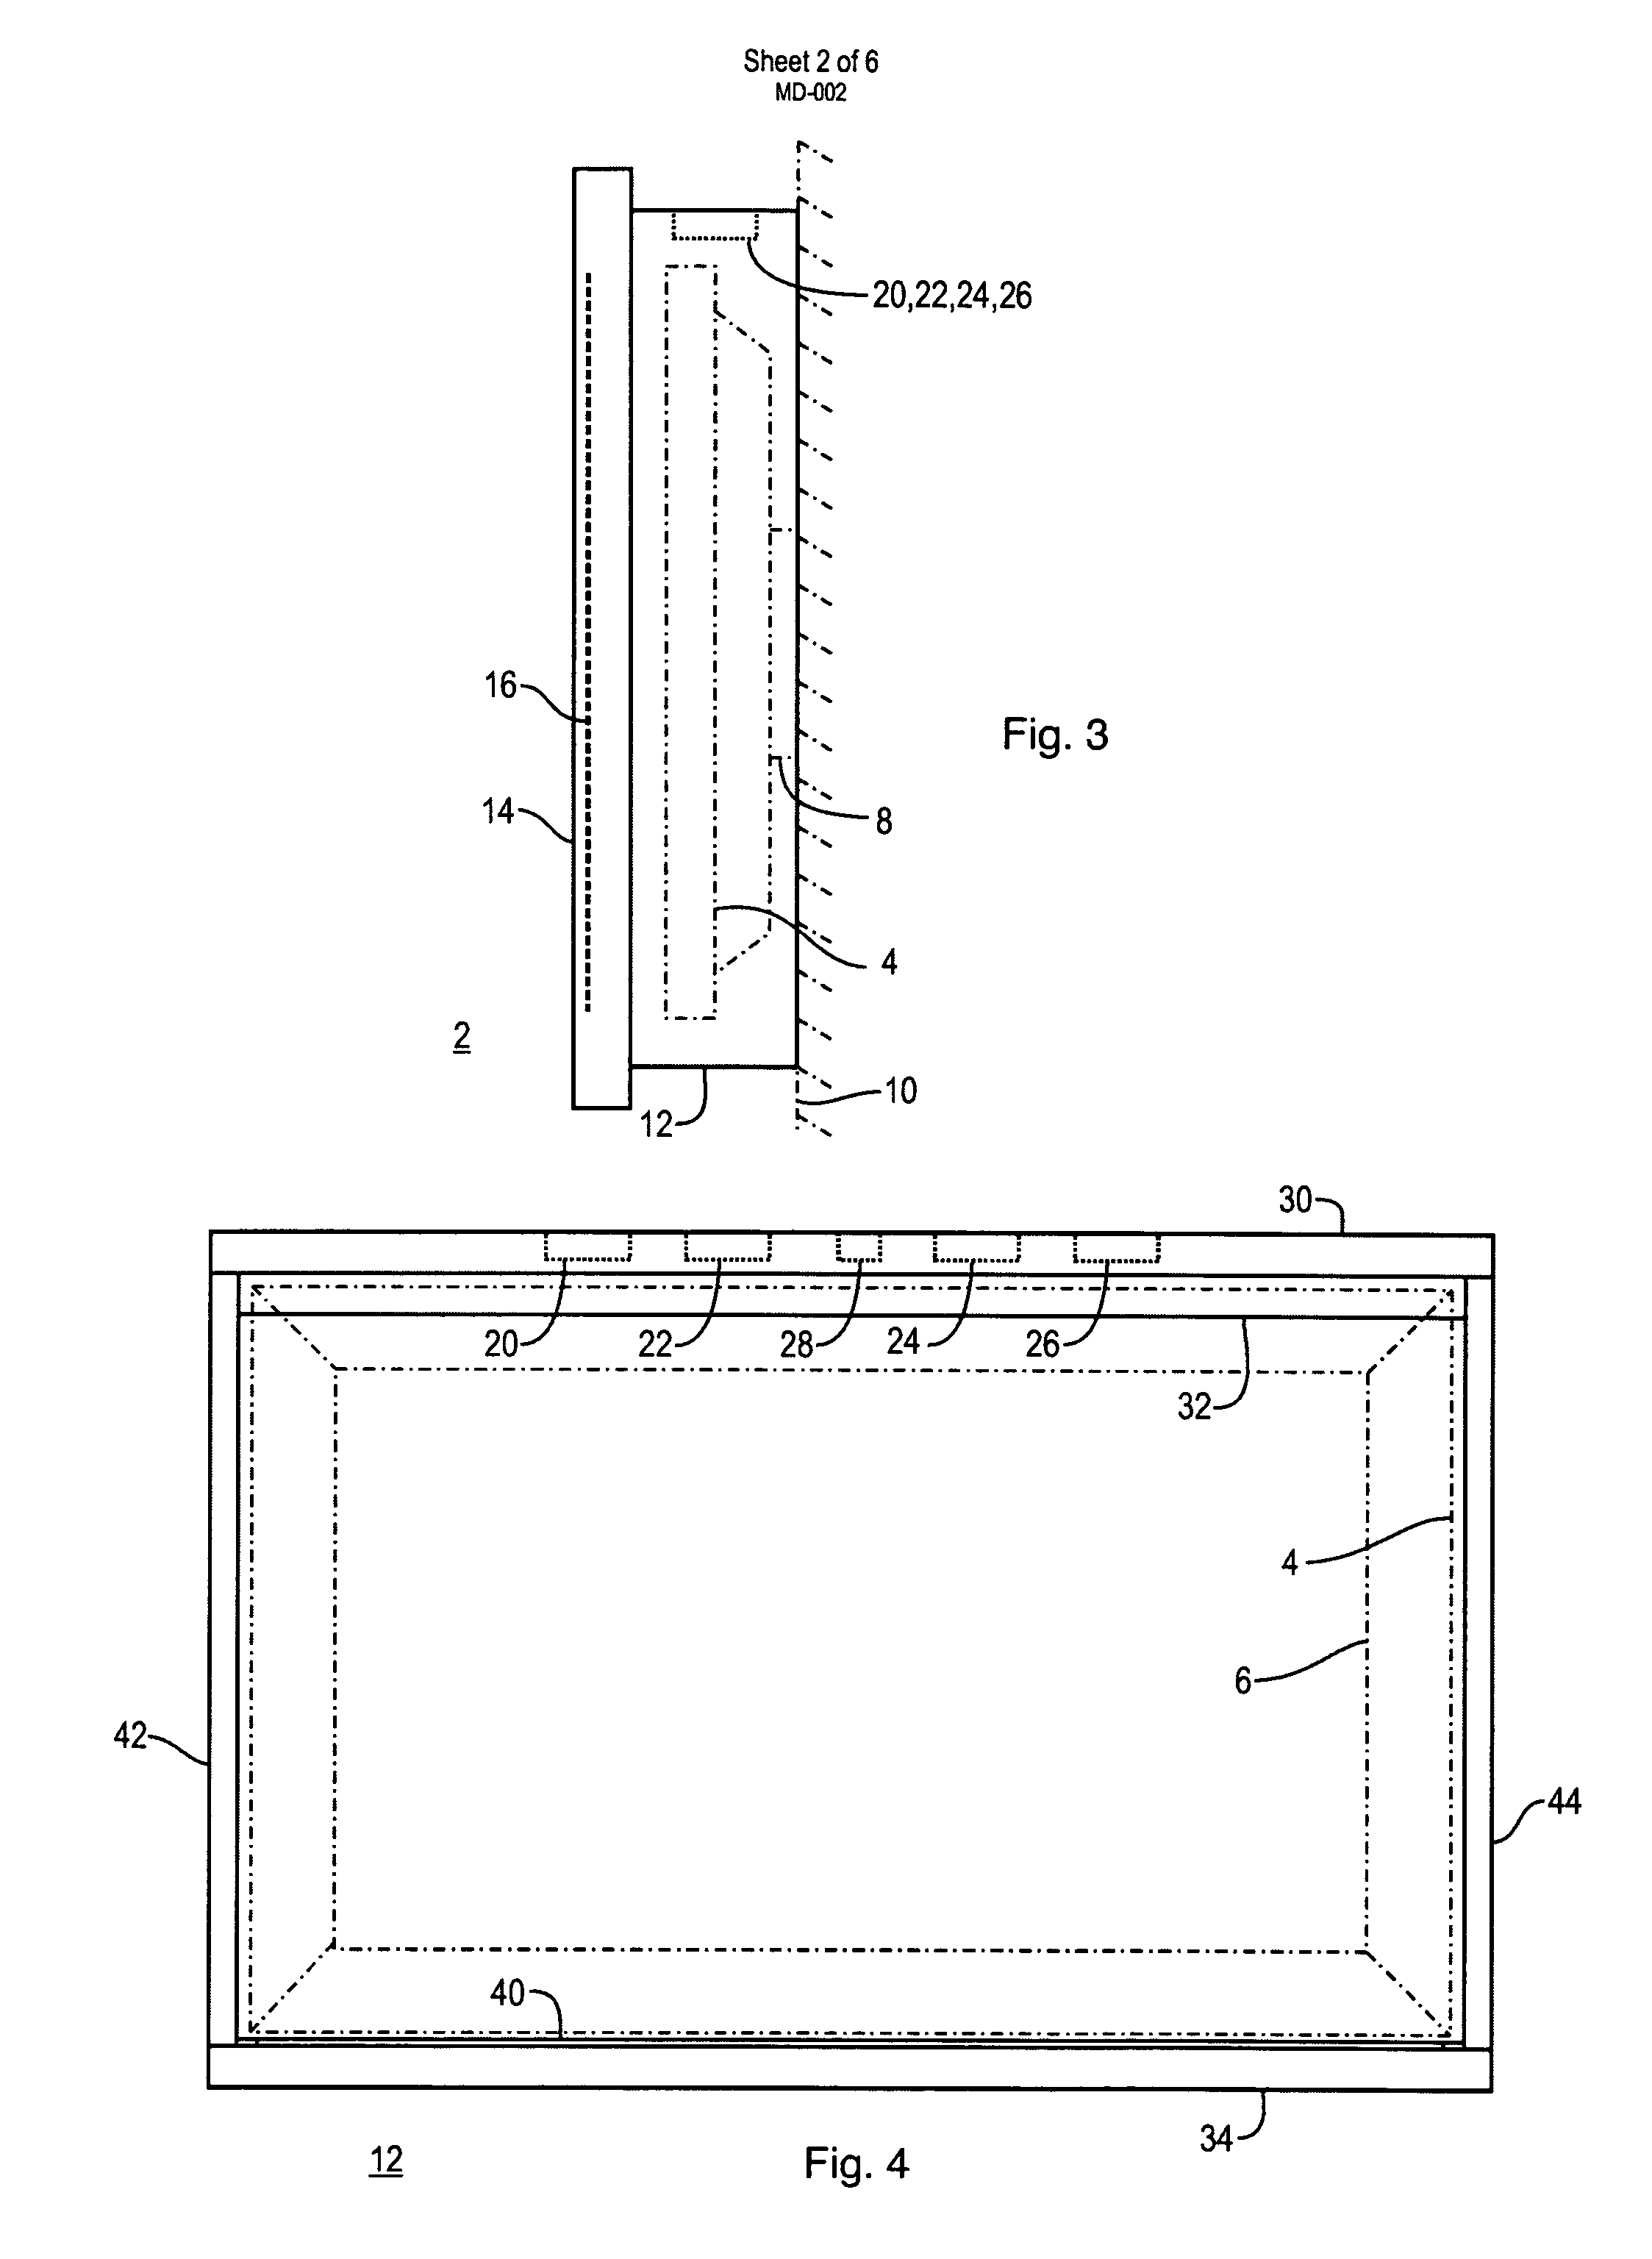 Mirrored decorative video display concealment and cooling apparatus and method